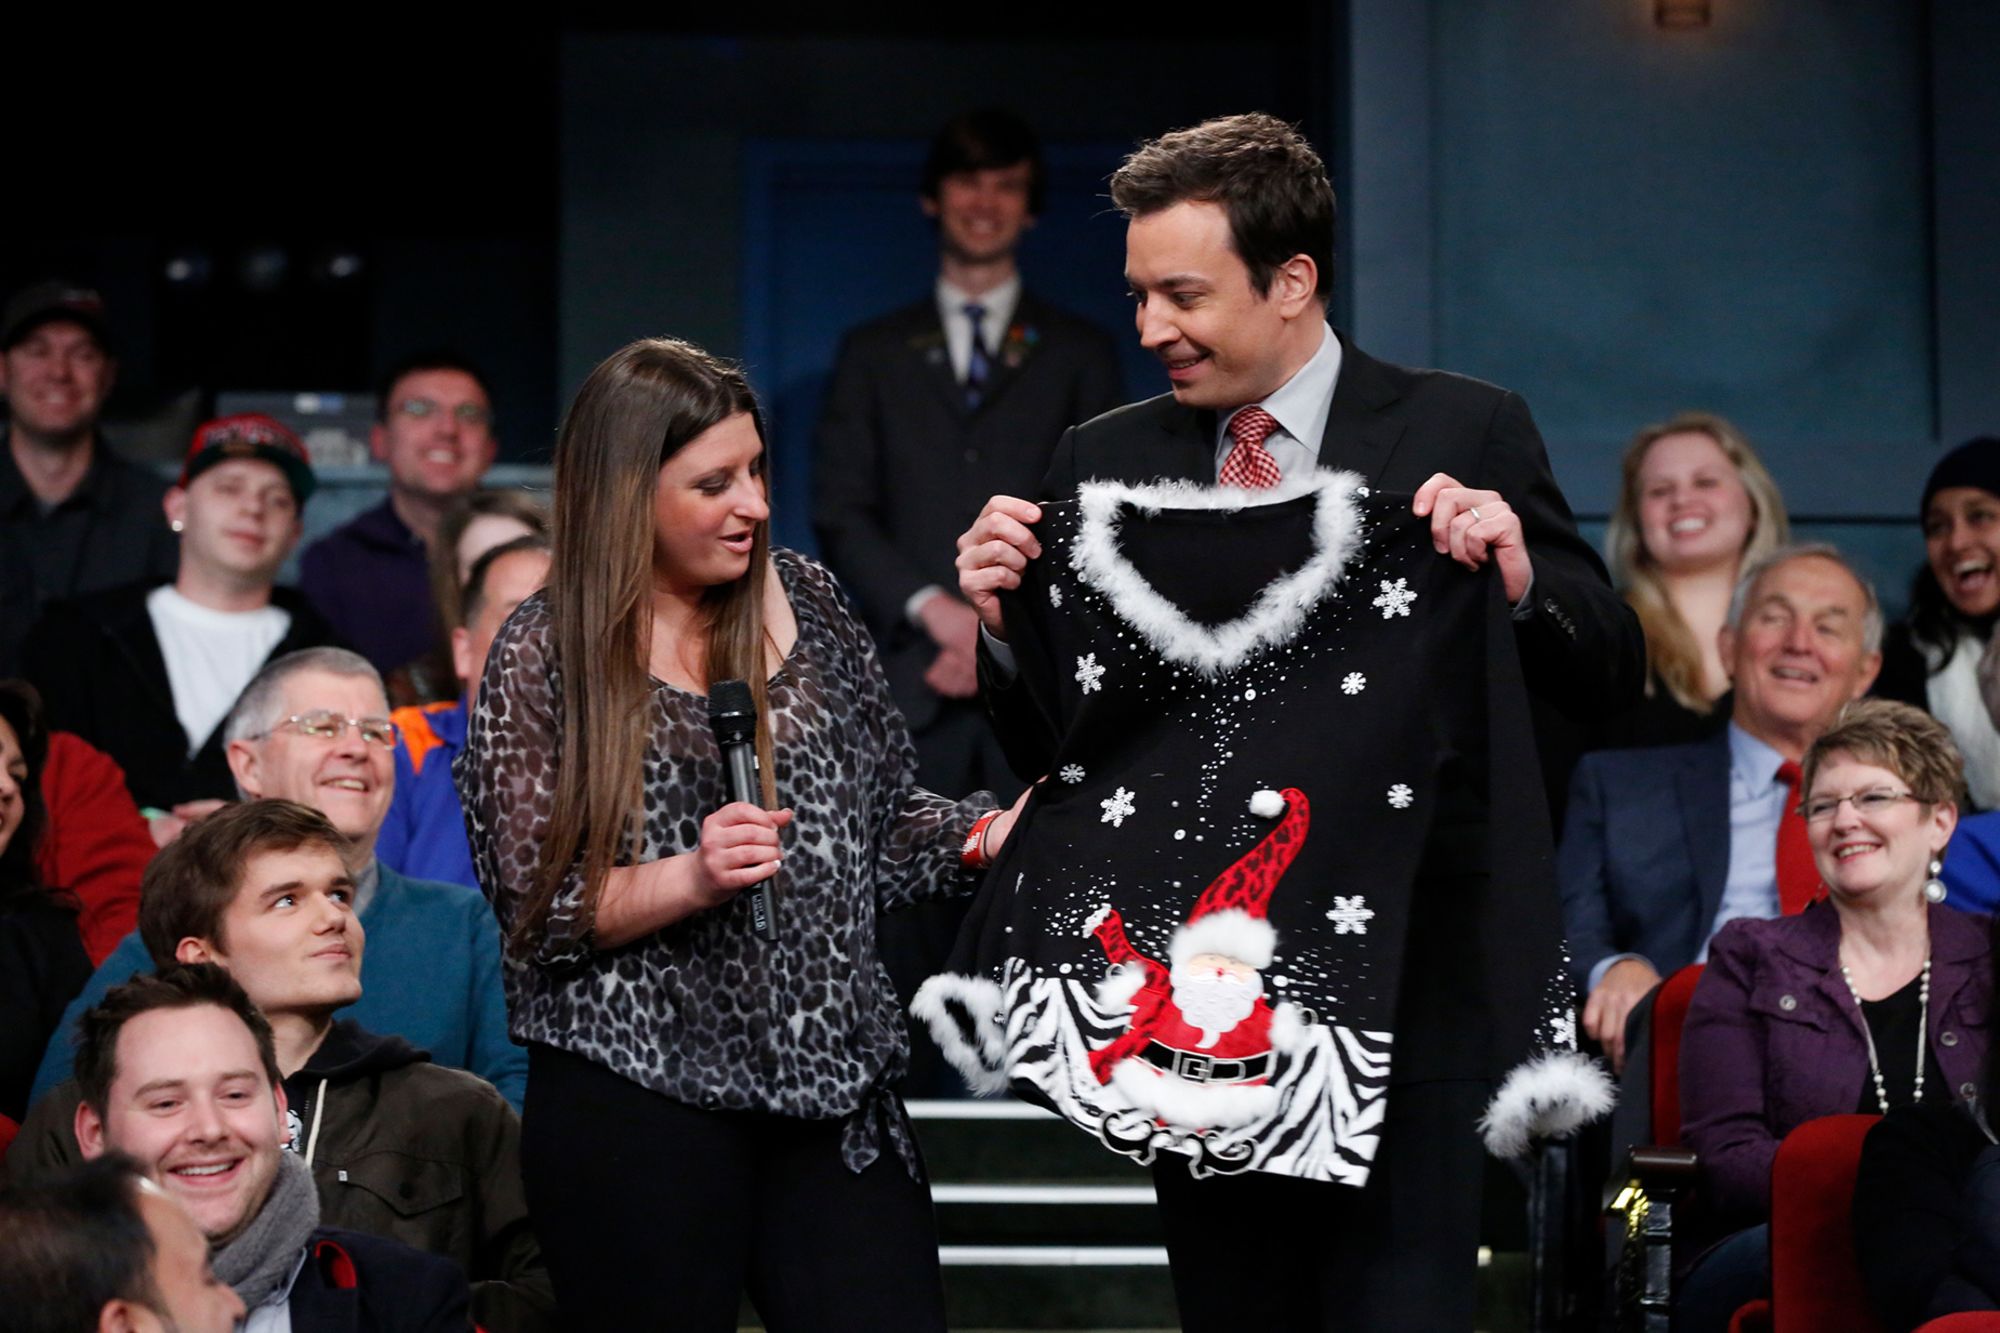 "The Tonight Show” host Jimmy Fallon gives away a festive Christmas sweater to an audience member in 2013.